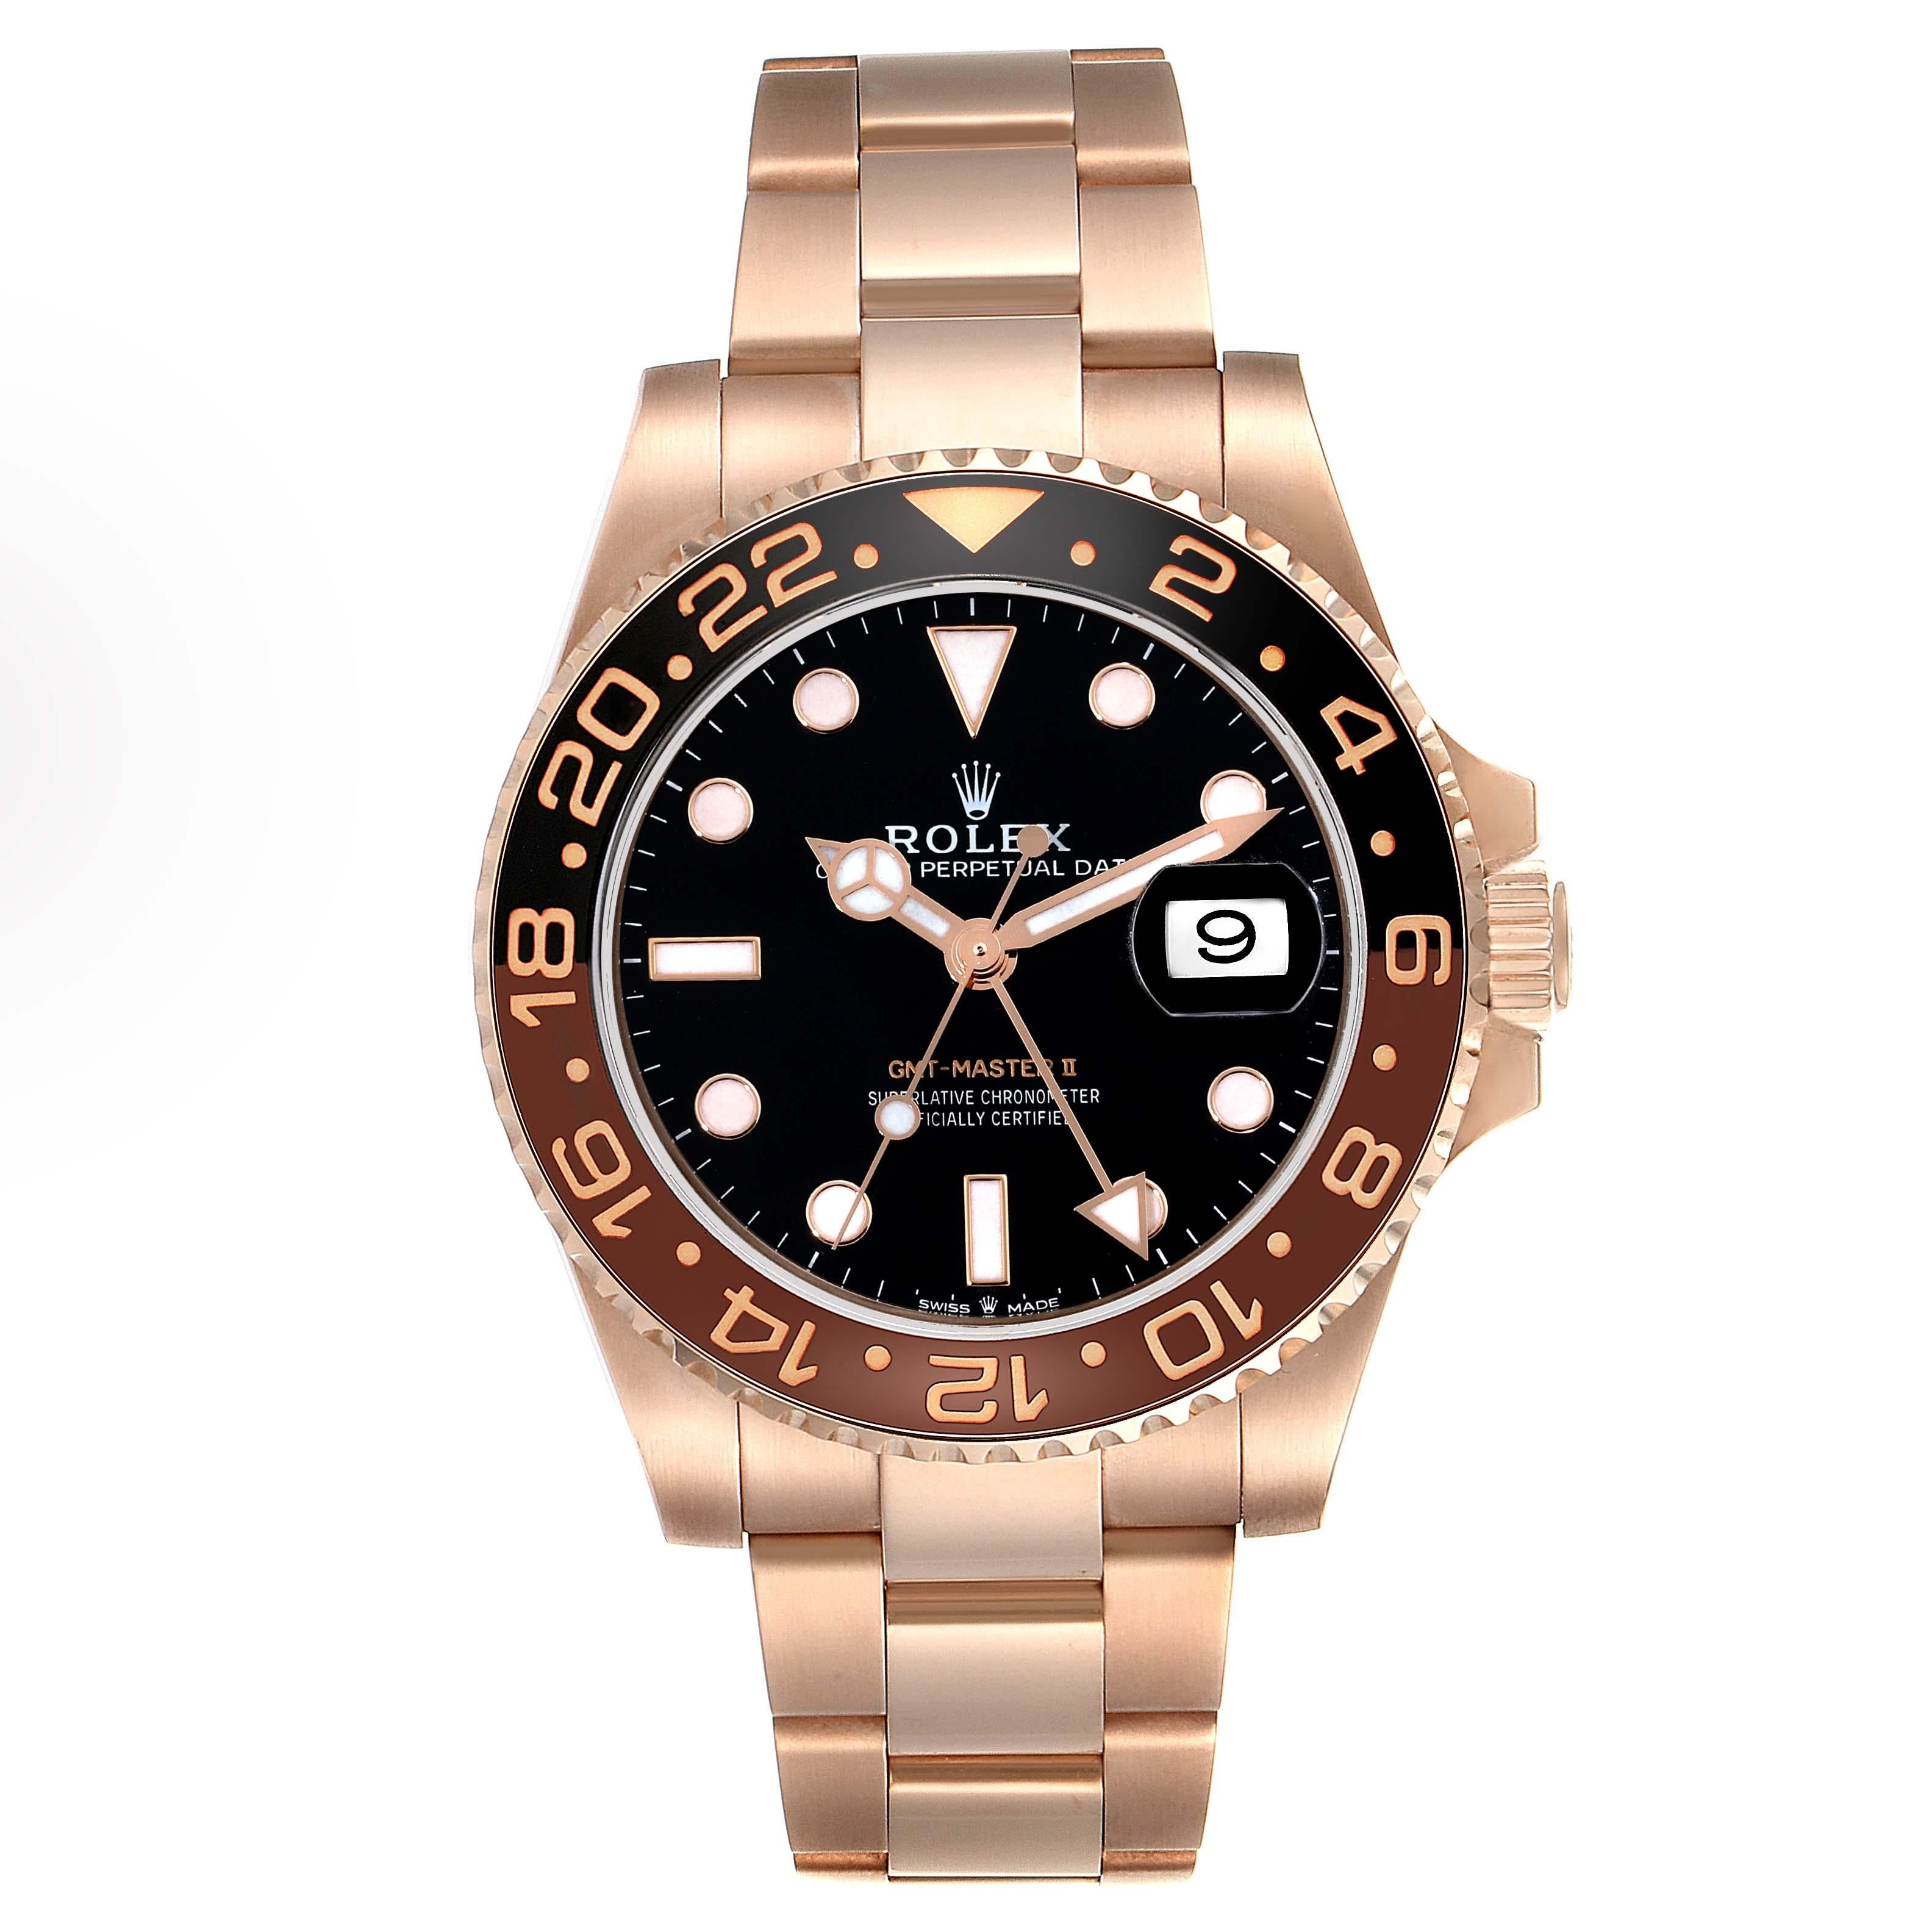 Rolex GMT Master II Black Brown Root Beer Rose Gold Mens Watch 126715 Box Card. Officially certified chronometer automatic self-winding movement. 18K Everose gold case 40.0 mm in diameter. Rolex logo on the crown. 18K Everose gold bidirectional